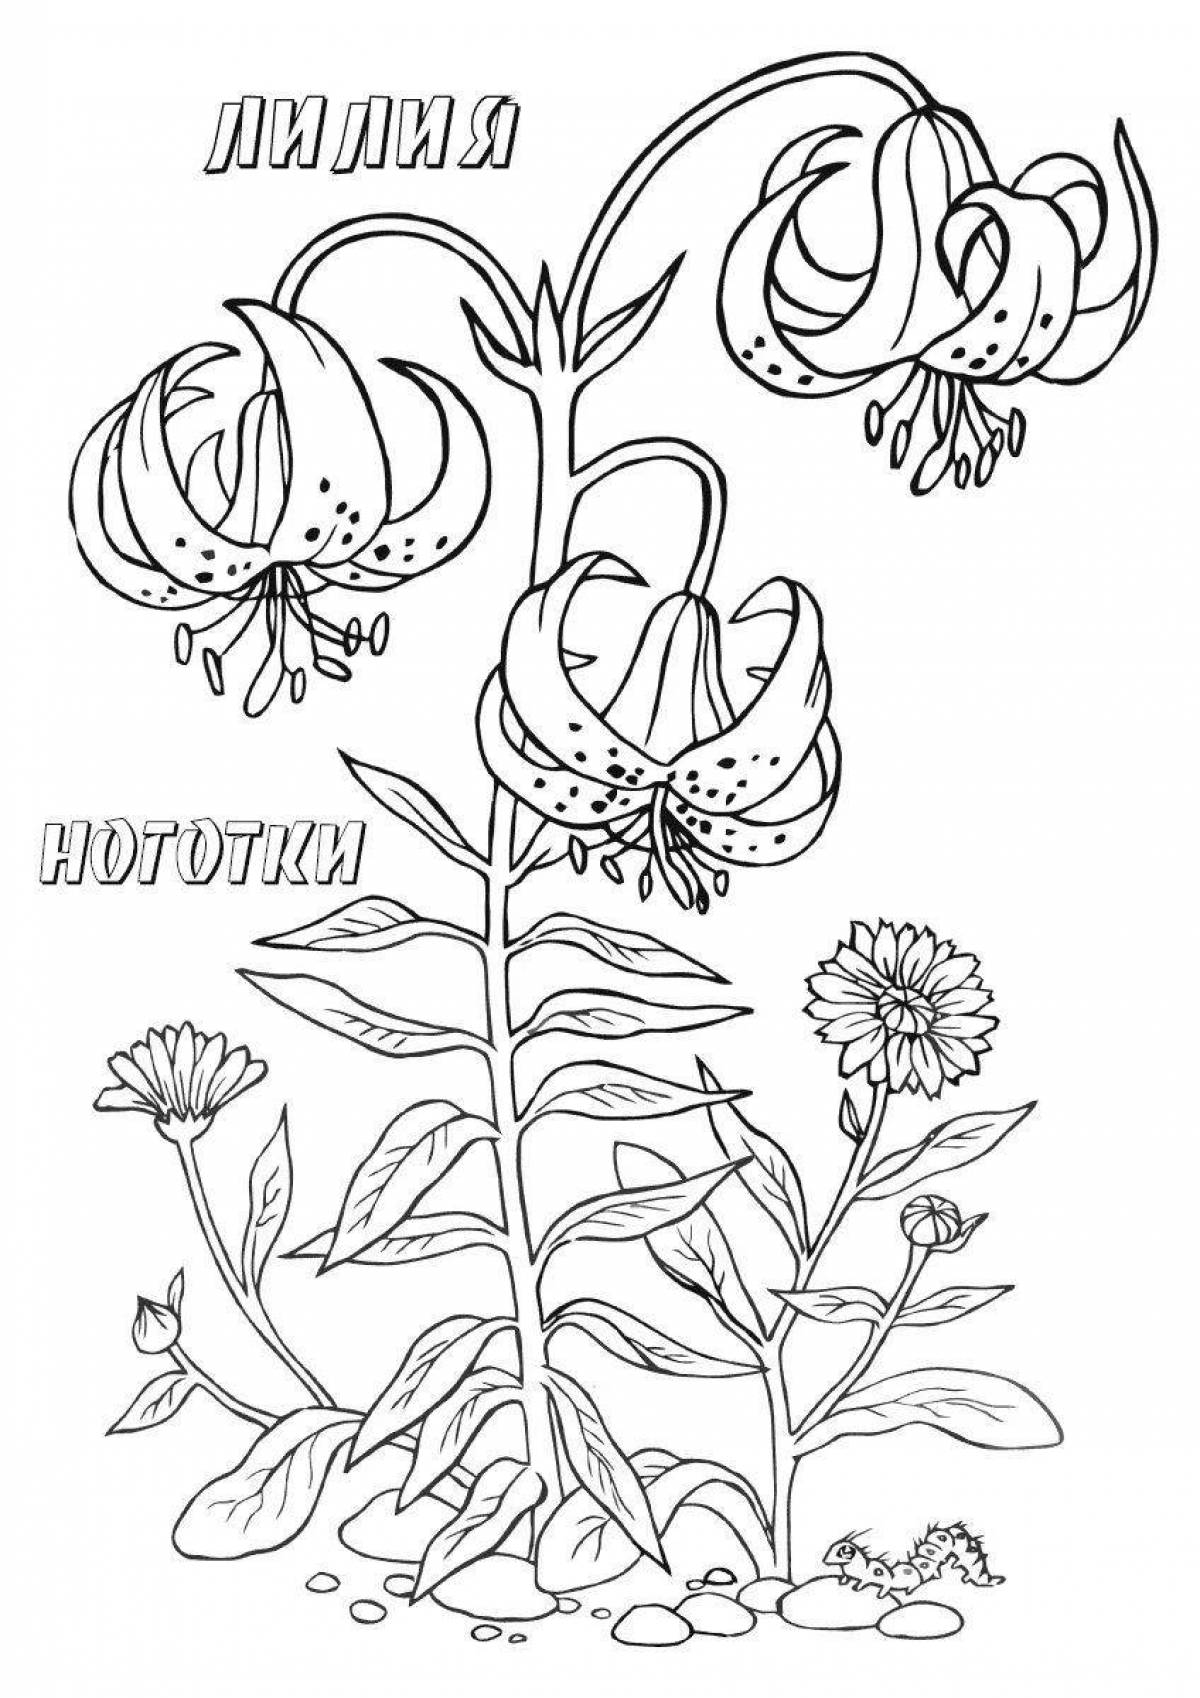 Charming coloring wild plants